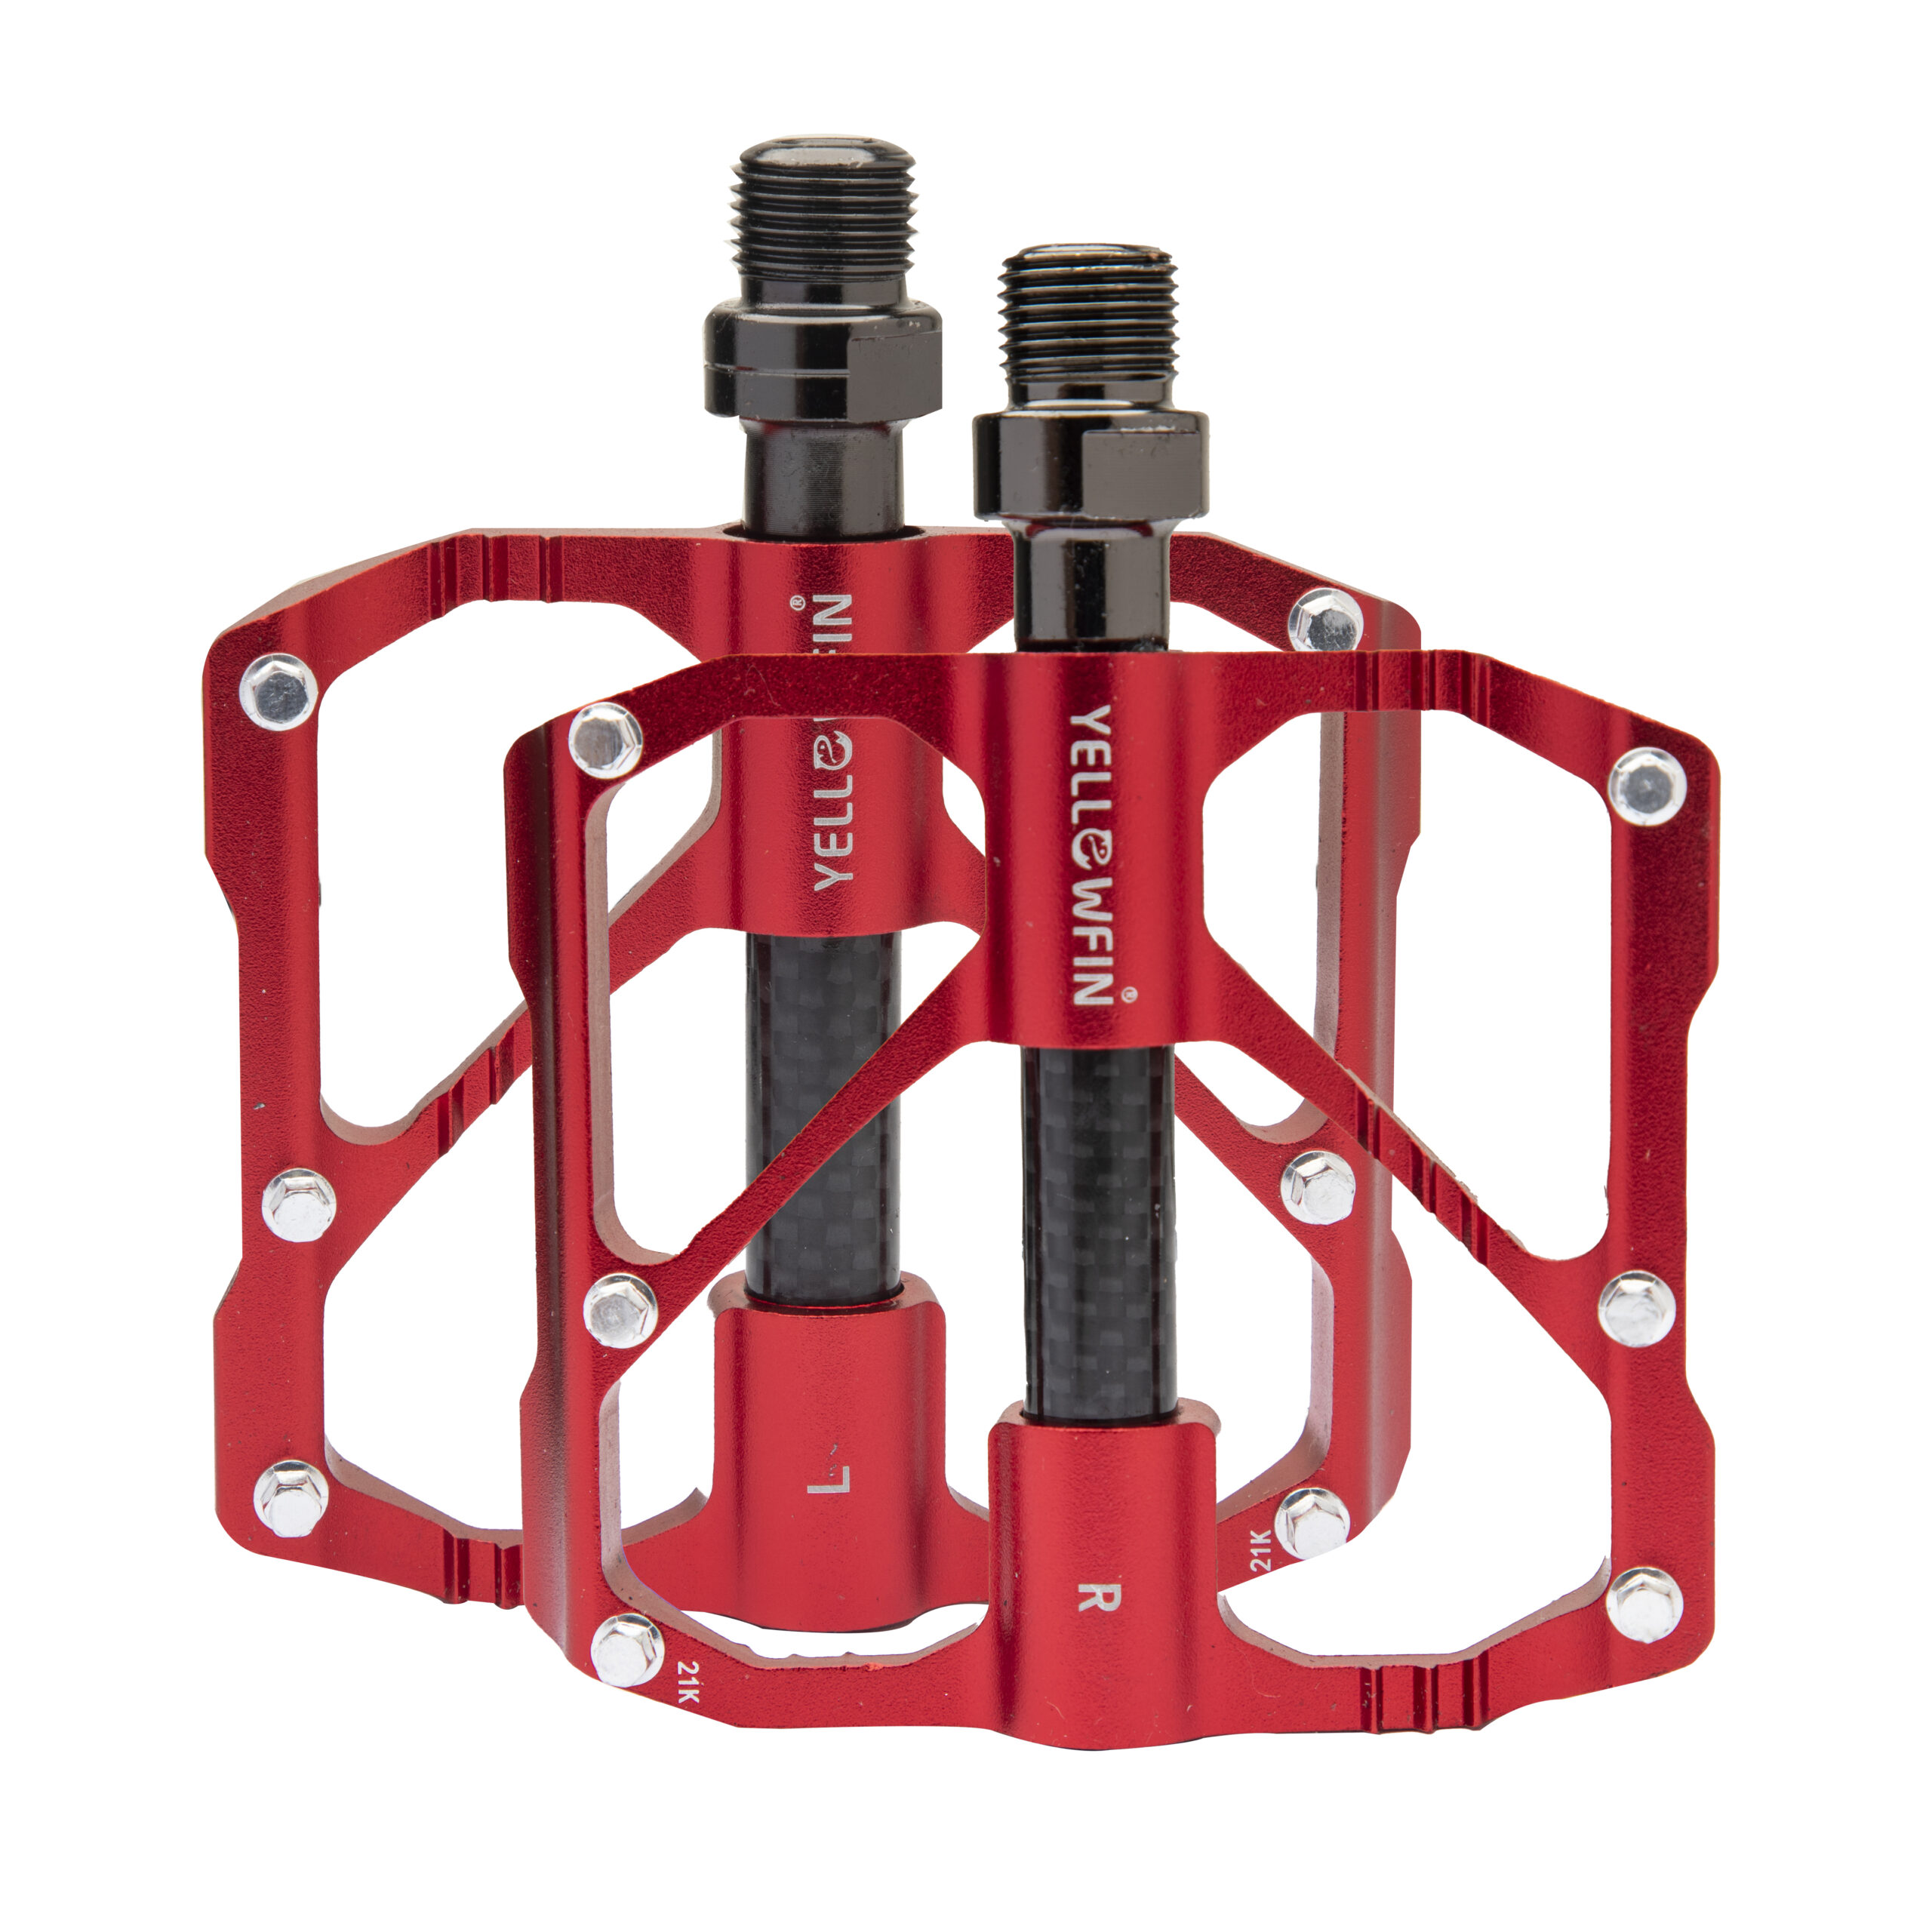 Aluminium Alloy Sealed Bearing Bicycle Pedals (Red)